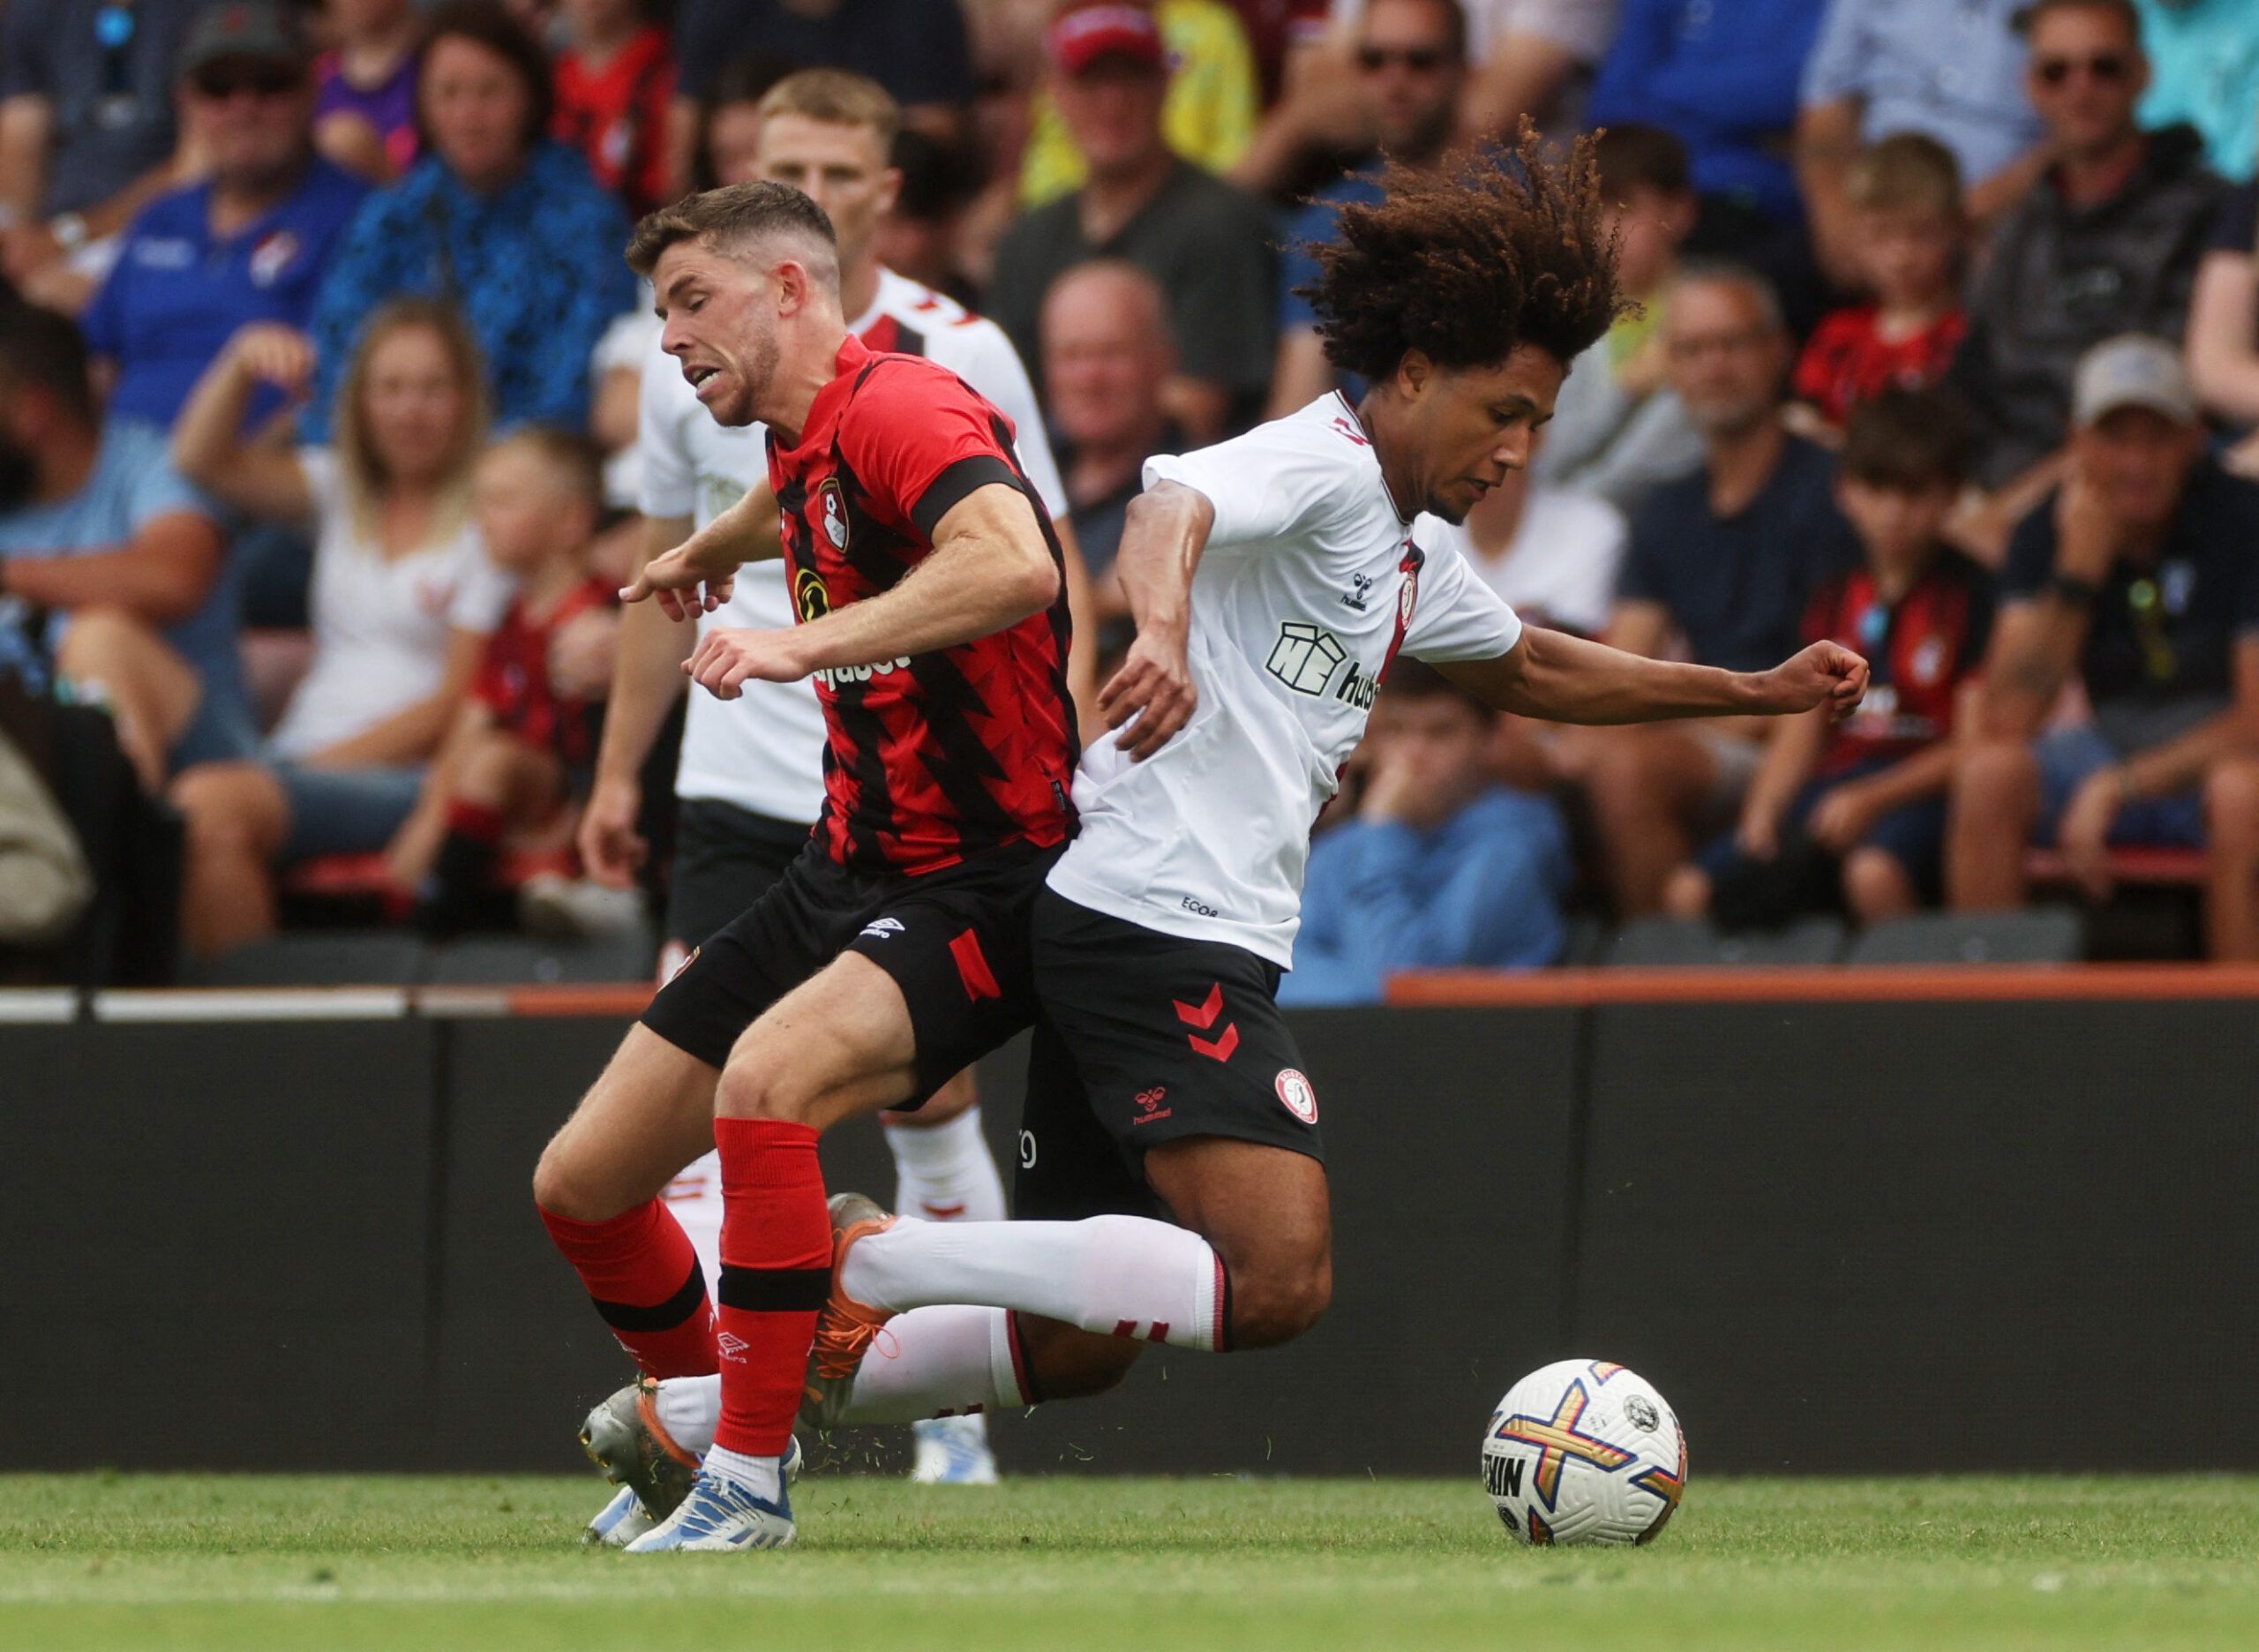 Soccer Football - Pre Season Friendly - AFC Bournemouth v Bristol City - Vitality Stadium, Bournemouth, Britain - July 23, 2022 AFC Bournemouth's Ryan Christie in action with Bristol City's Han-Noah Massengo Action Images via Reuters/Paul Childs